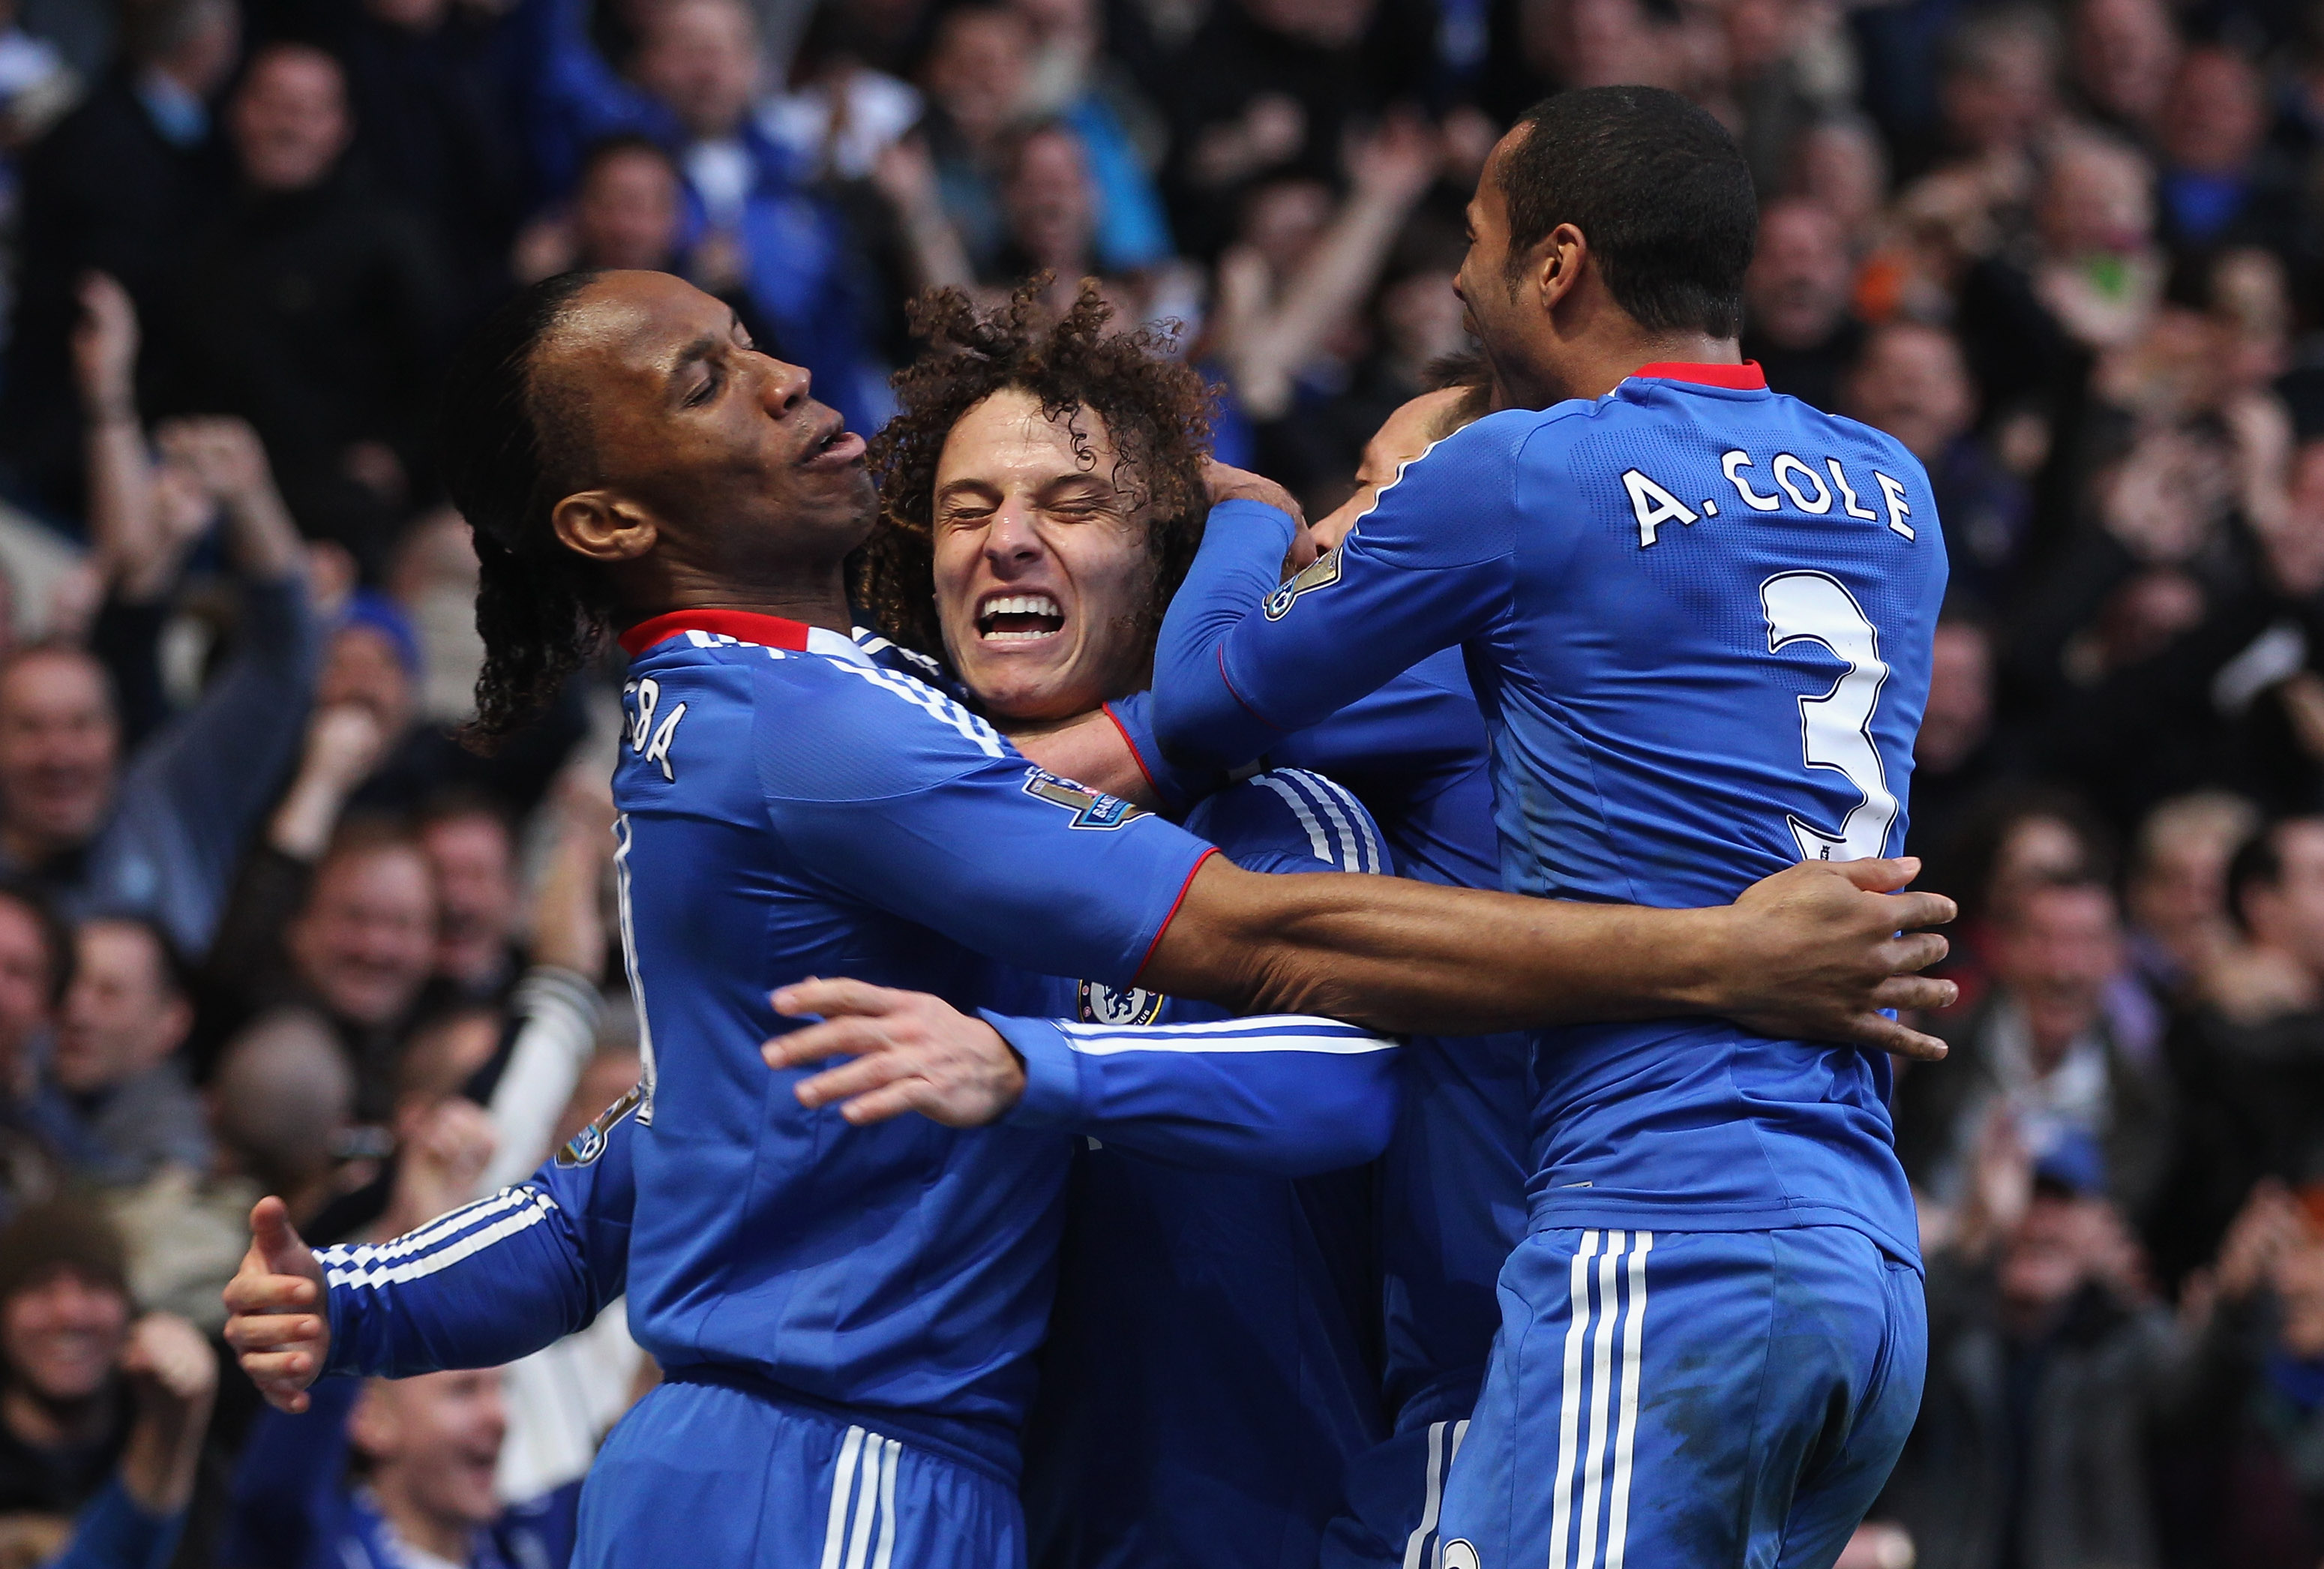 LONDON, ENGLAND - MARCH 20:  David Luiz of Chelsea (2L) celebrates with Didier Drogba (L), John Terry (2R) and Ashley Cole (R) as he scores their first goal during the Barclays Premier League match between Chelsea and Manchester City at Stamford Bridge on